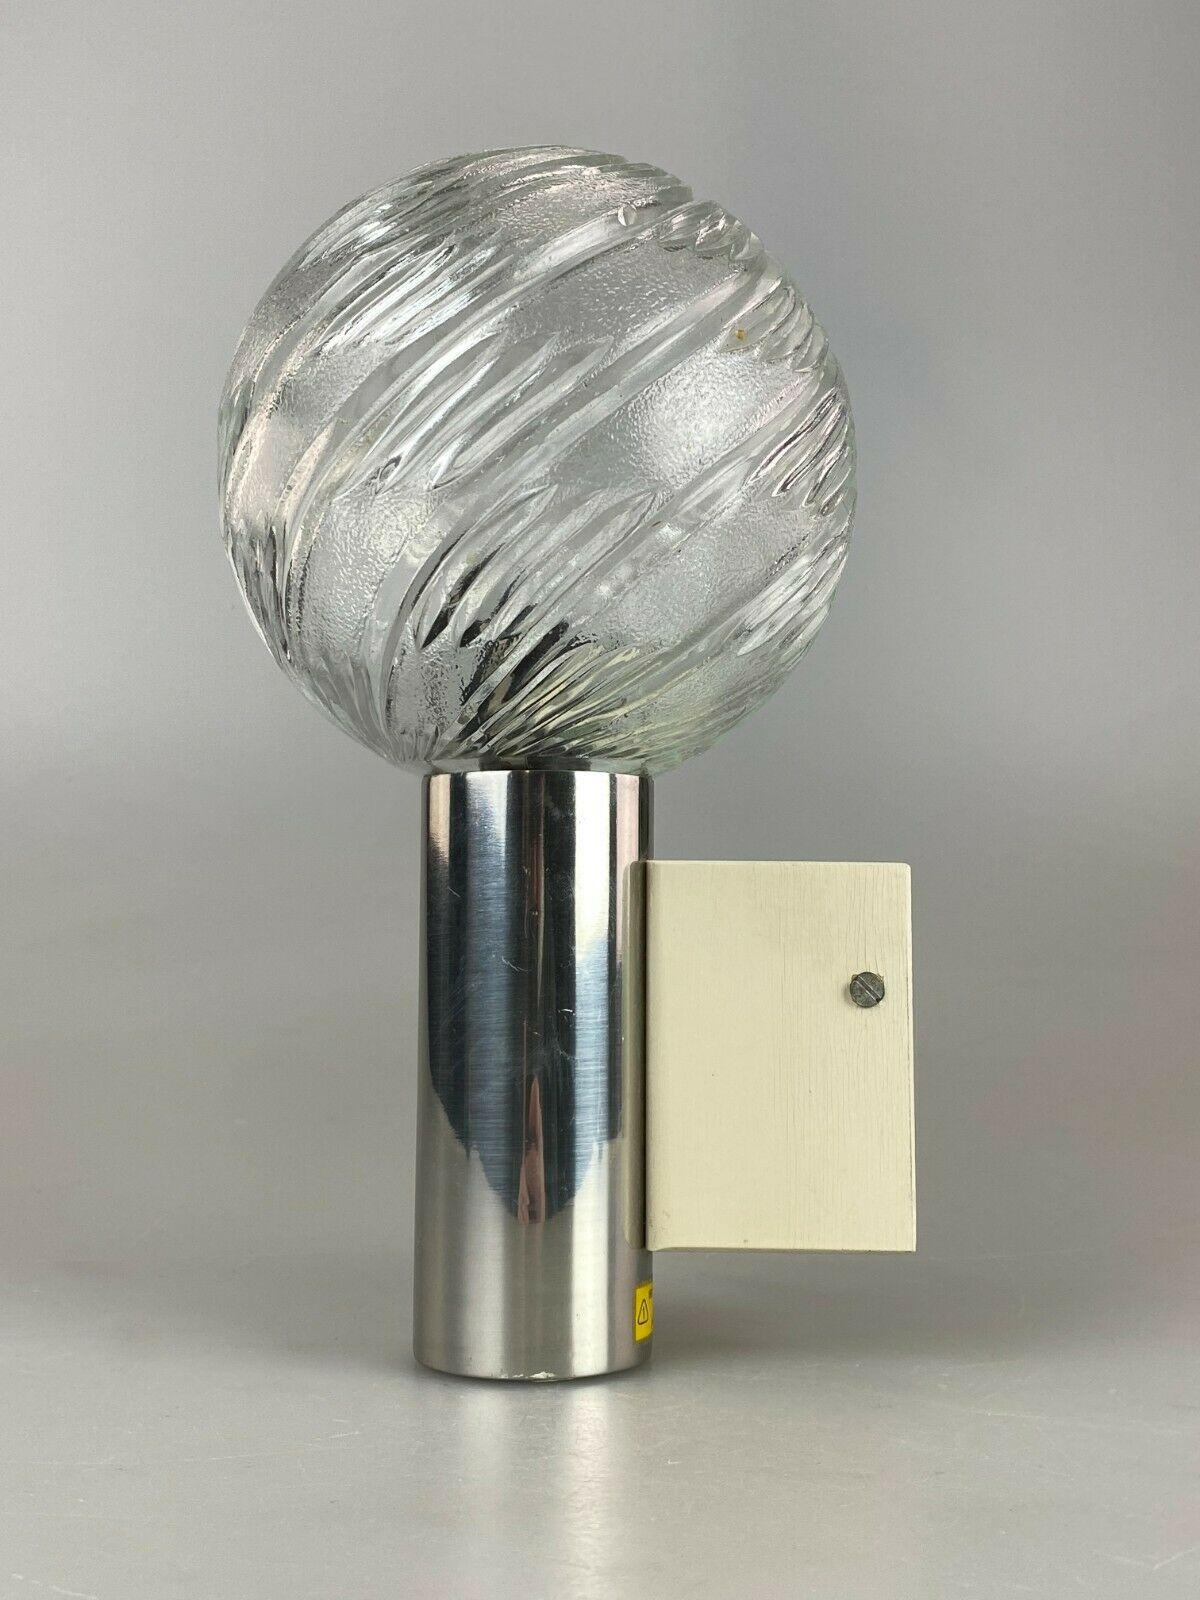 60s 70s wall lamp ball lamp lamp light space age design 60s 70s

Object: wall lamp

Manufacturer: VEB

Condition: good

Age: around 1960-1970

Dimensions:

15cm x 14.5cm x 26cm

Other notes:

The pictures serve as part of the